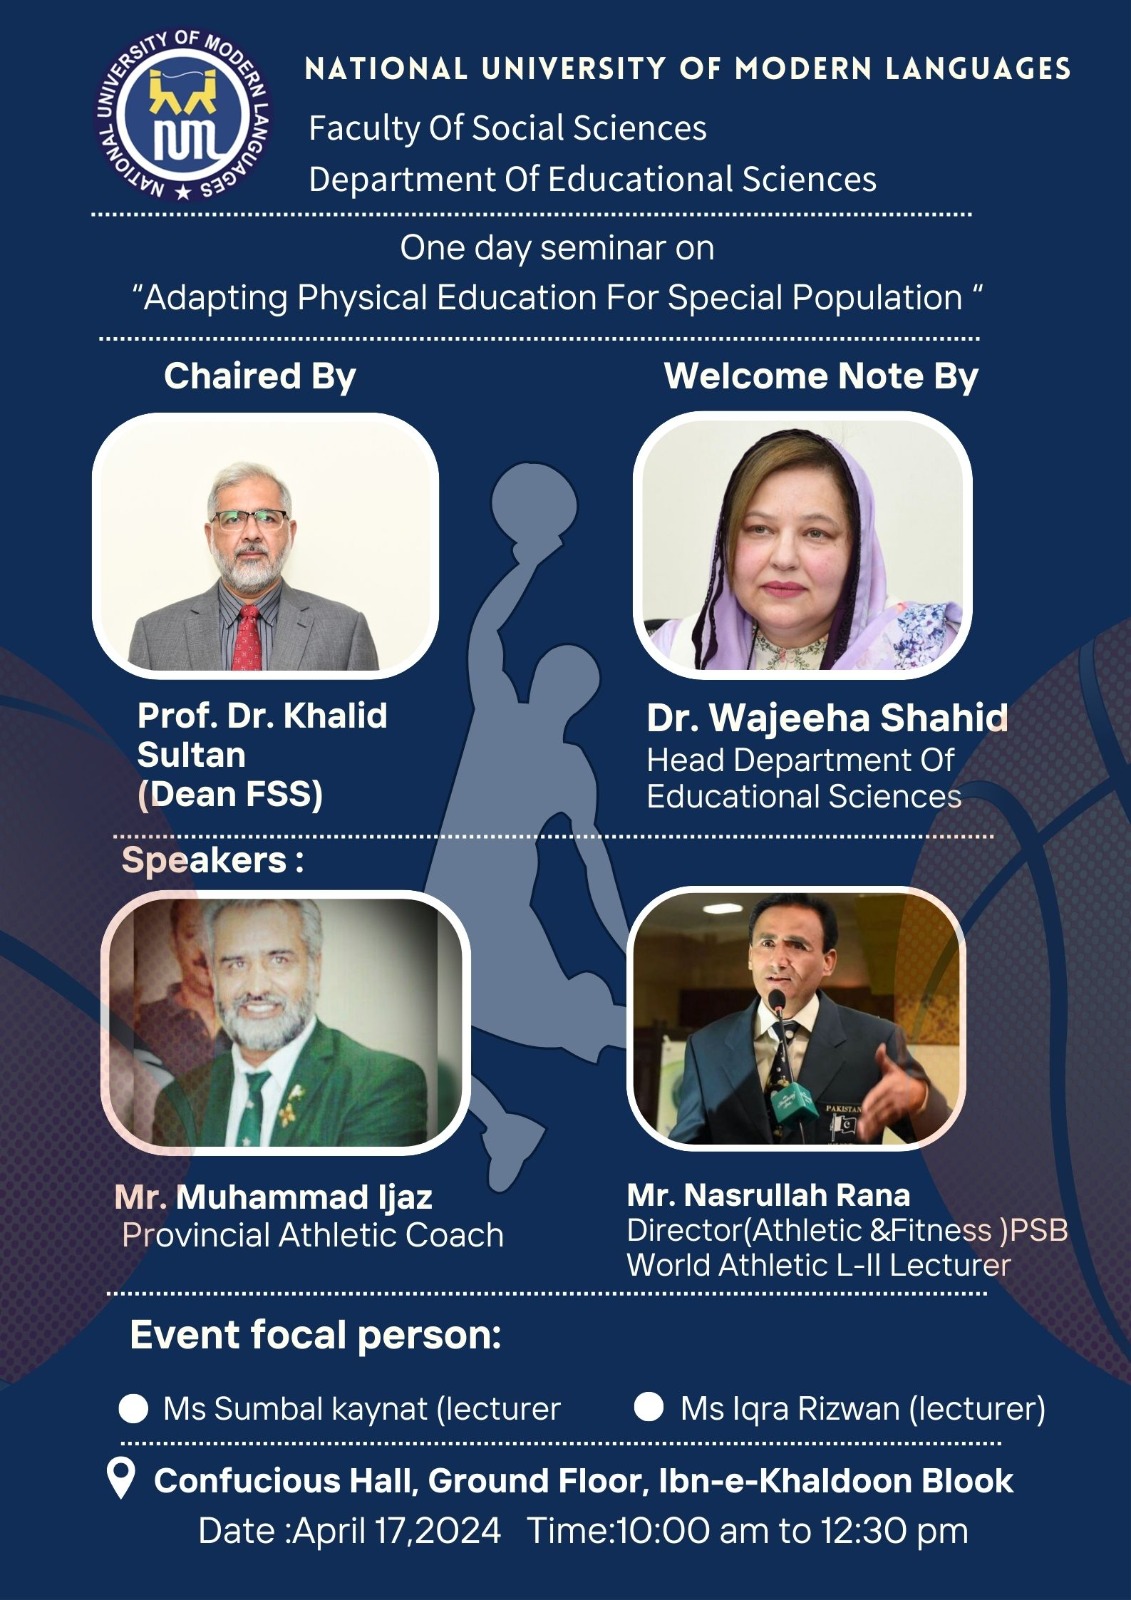 One day seminar on "Adapting Physical Education For Special Population"